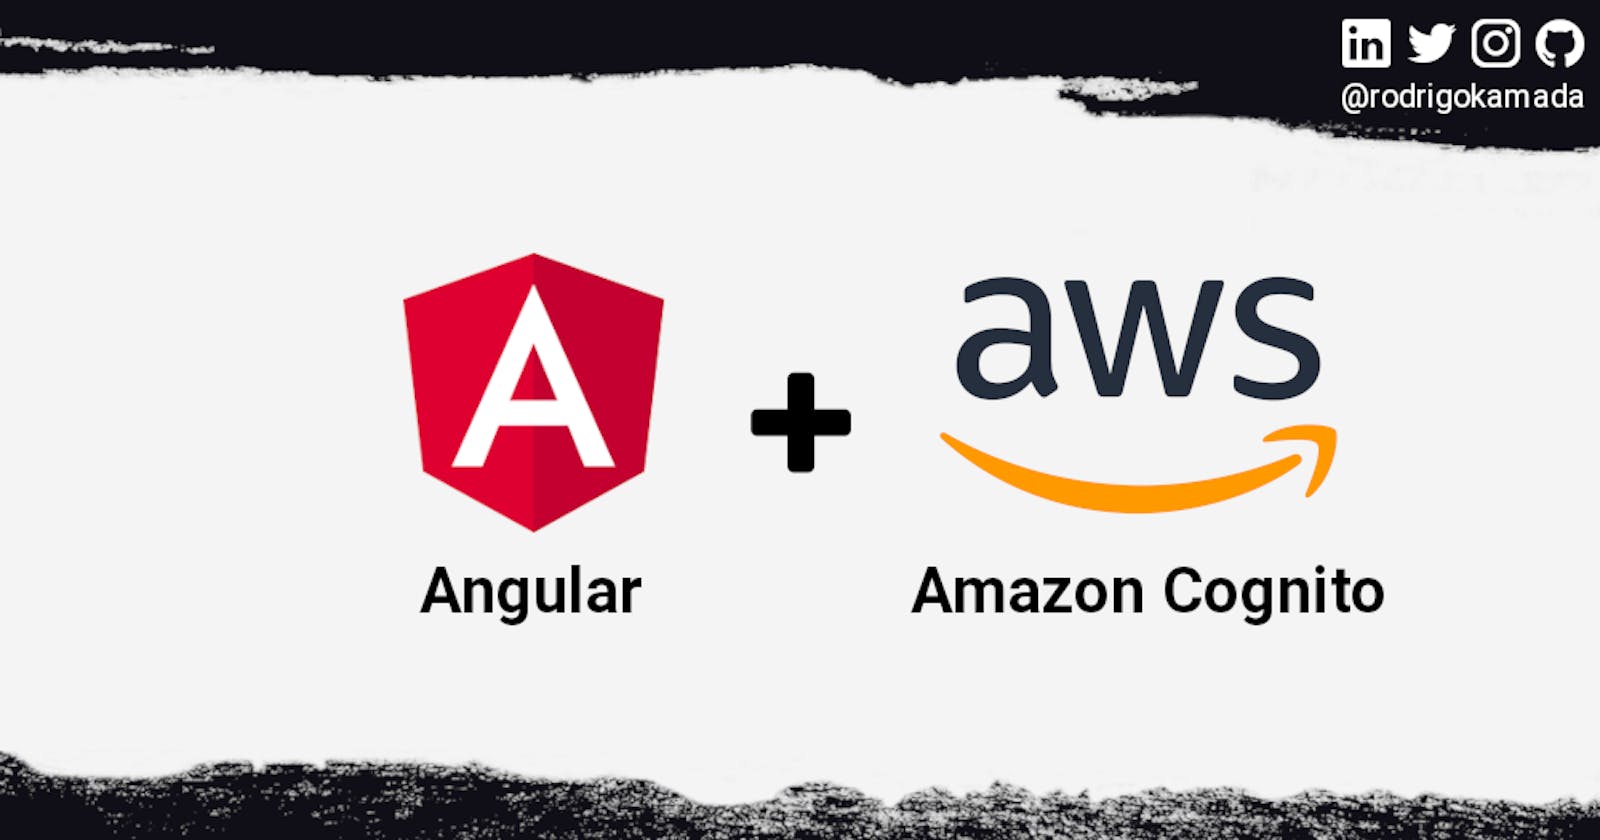 Authentication using the Amazon Cognito to an Angular application